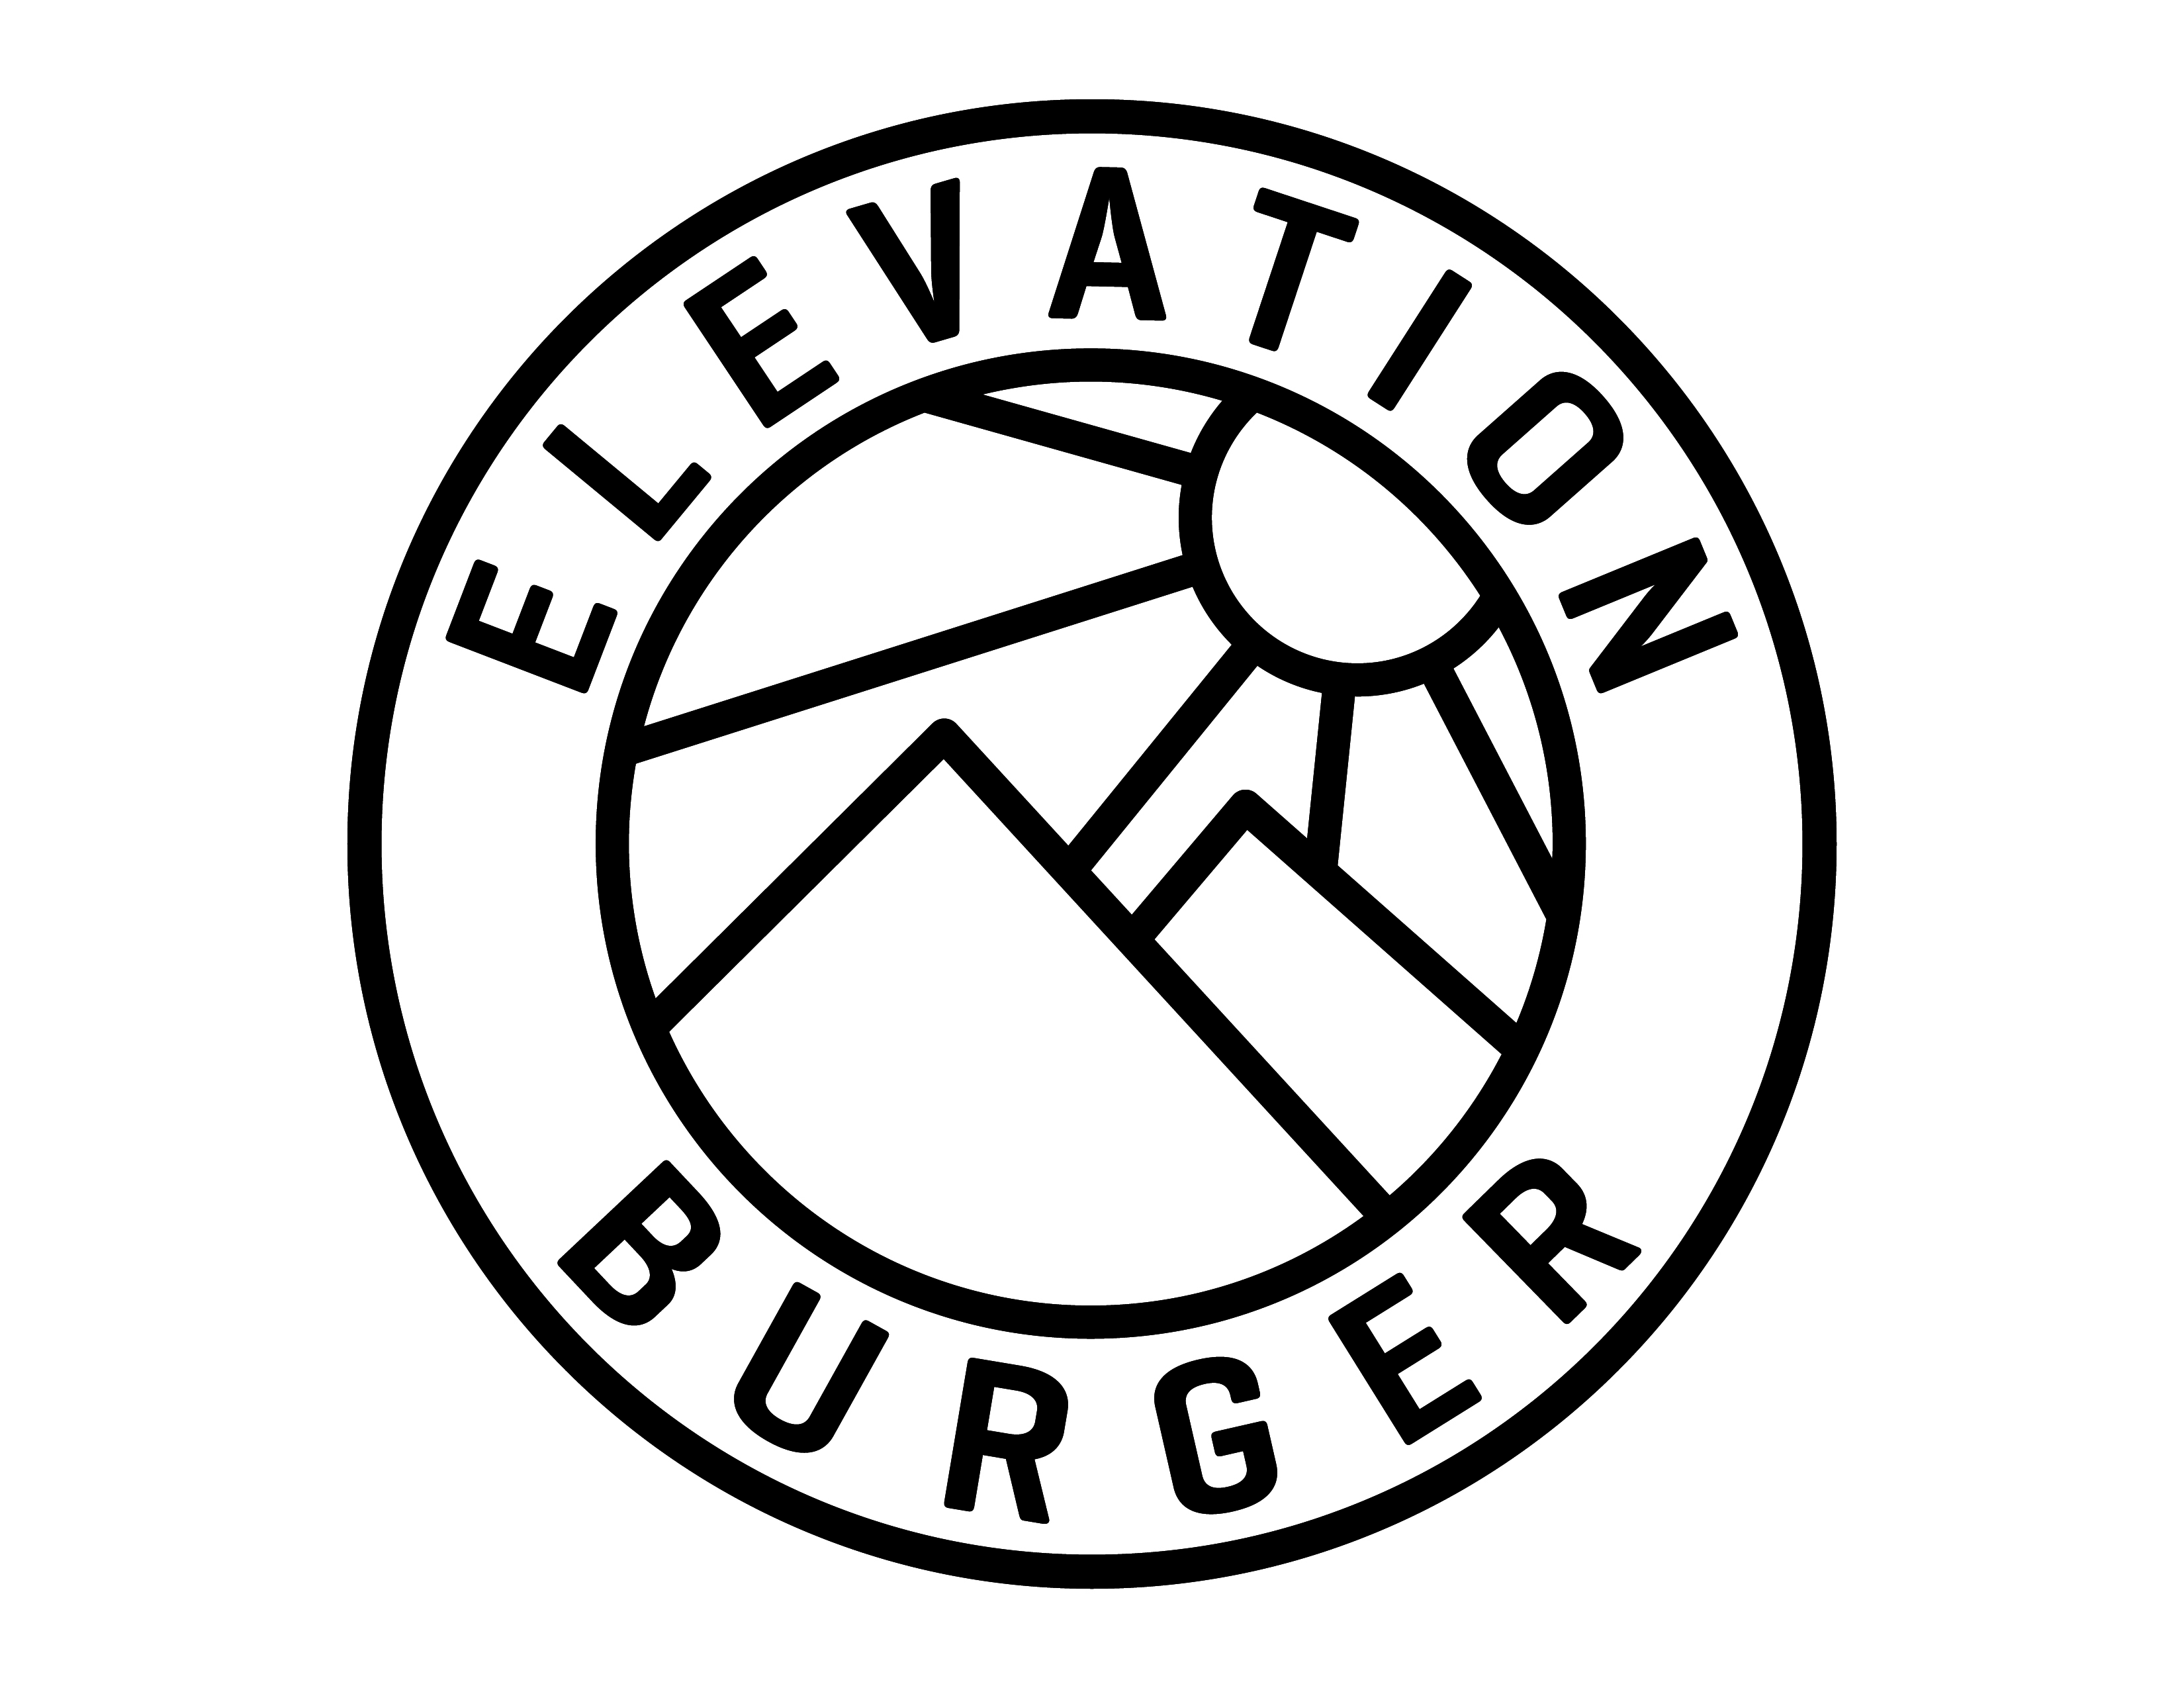 Fresh and Premium Foods to Satisfy Hunger and Cravings by Elevation Burger